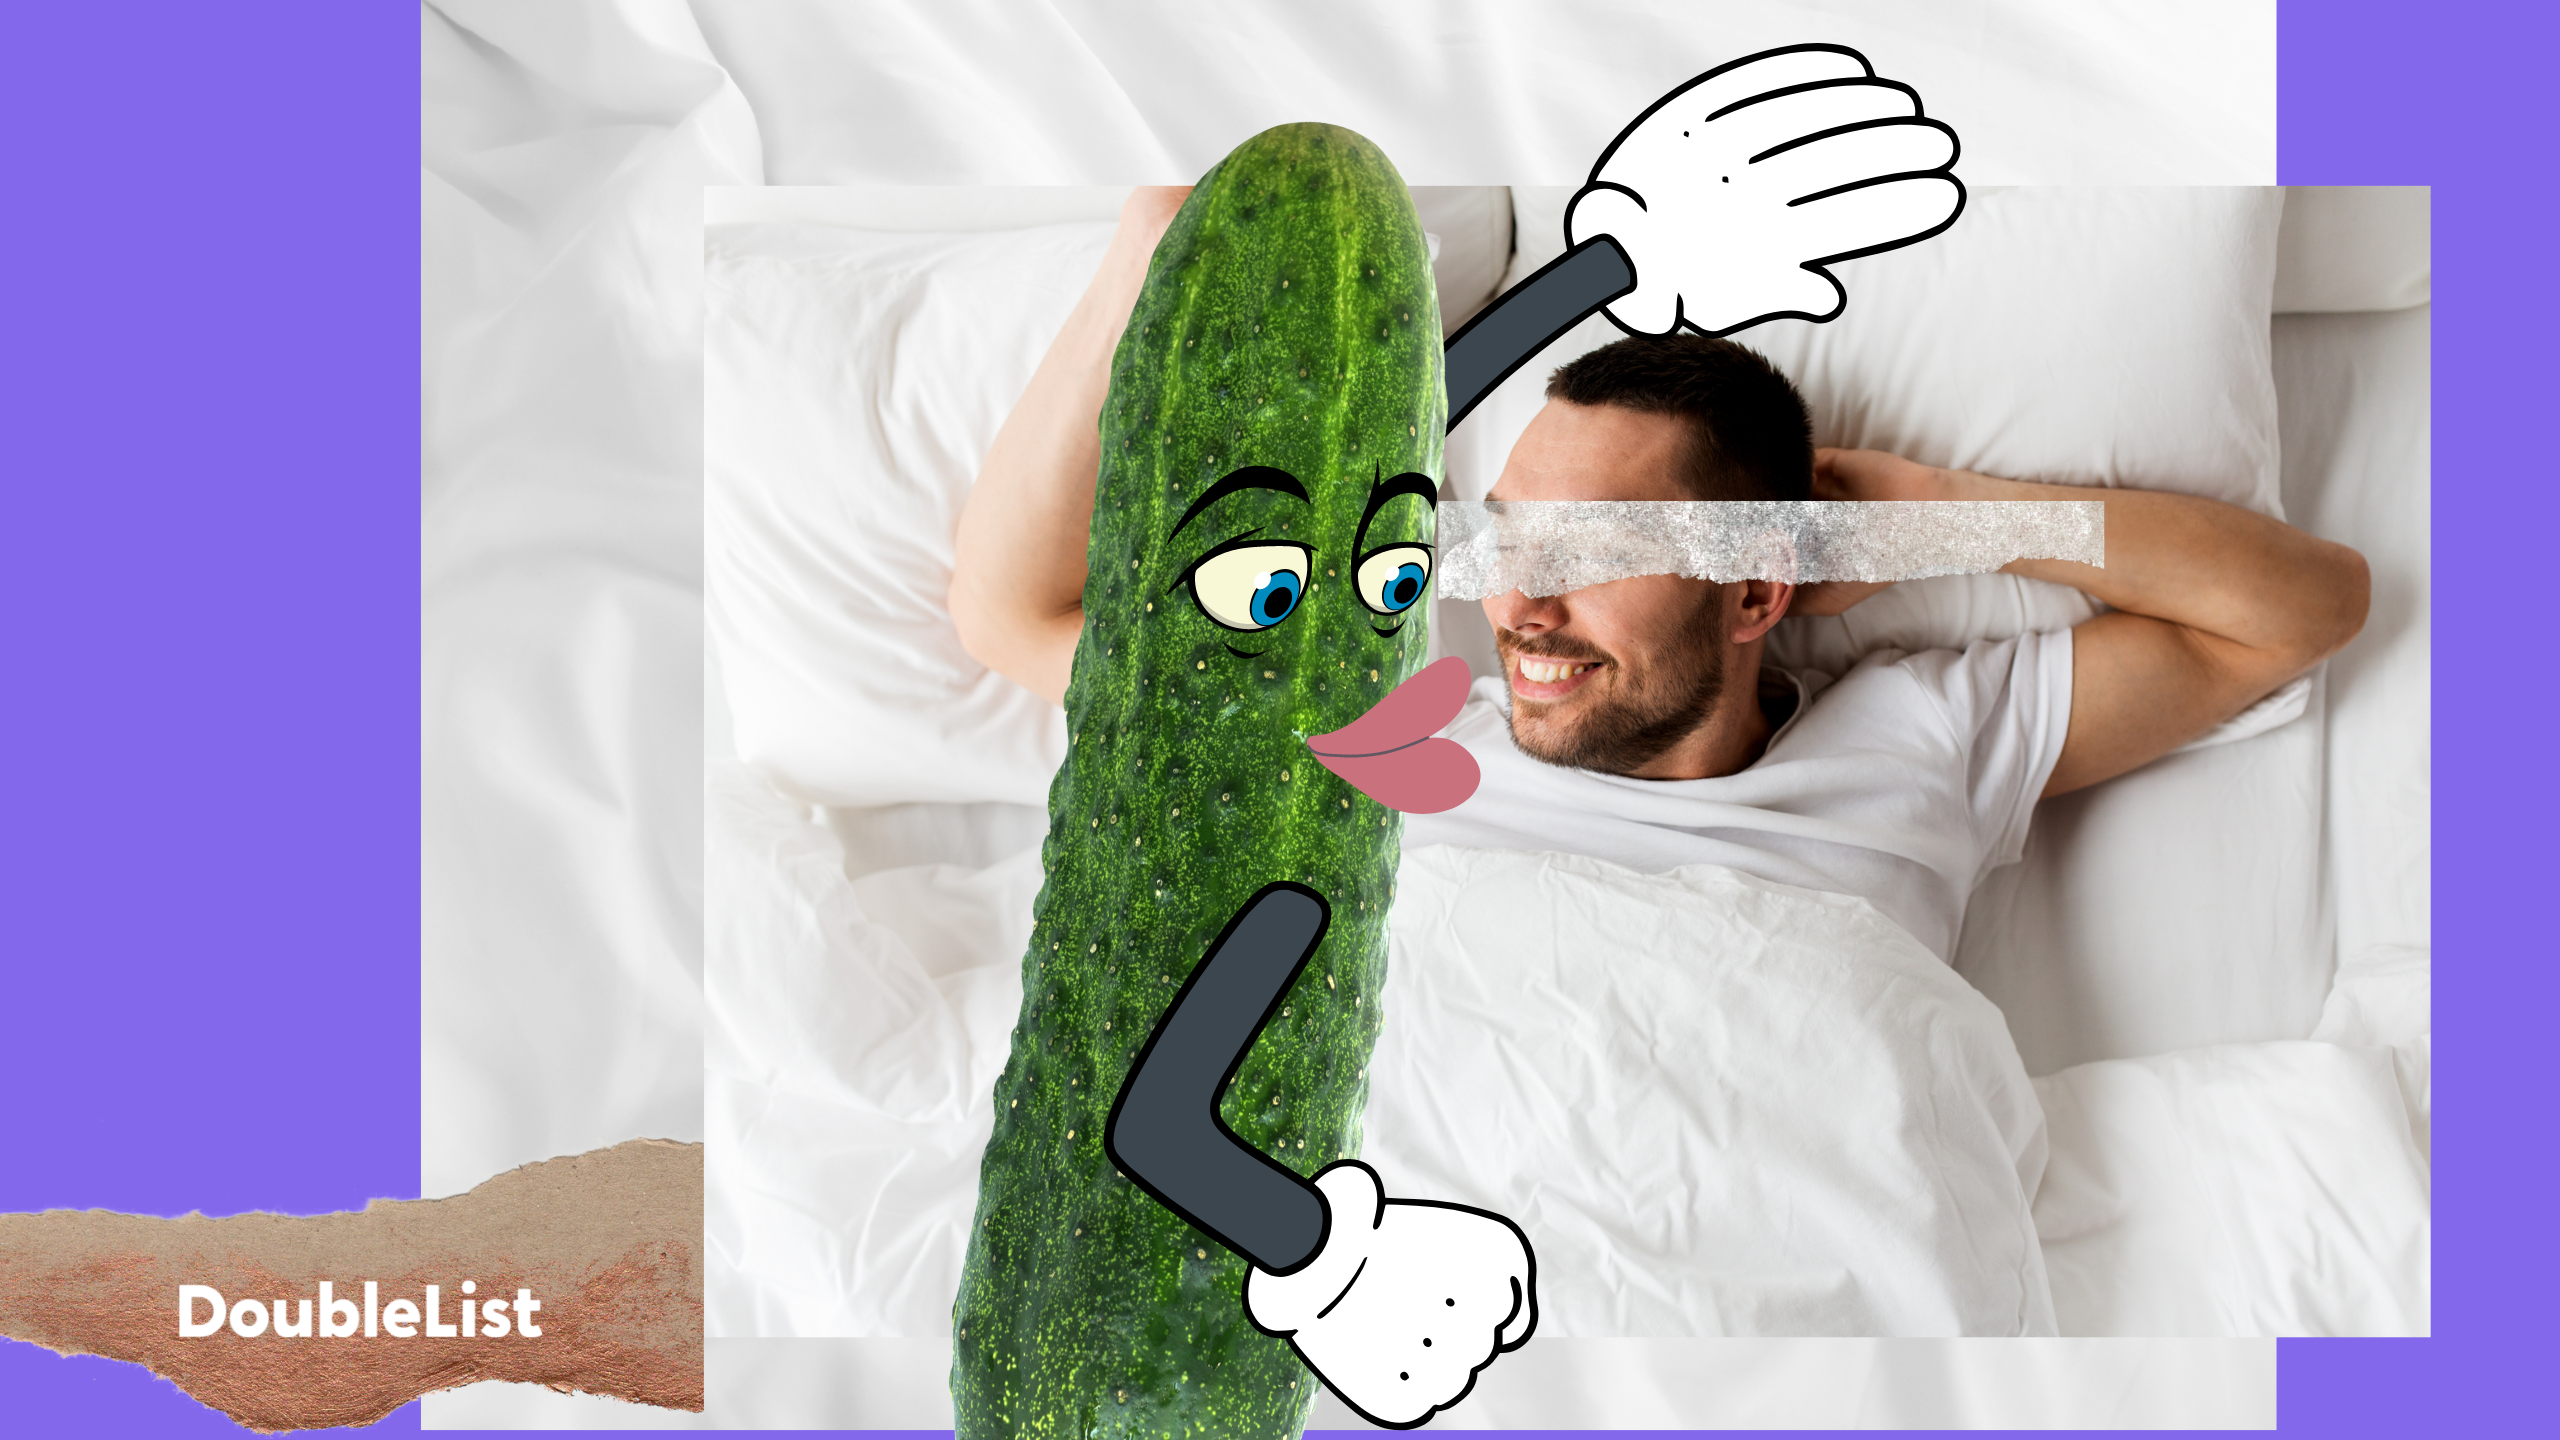 A man in bed with a cartoon pickle representing wanting to go to meeting place for a casual encounter.